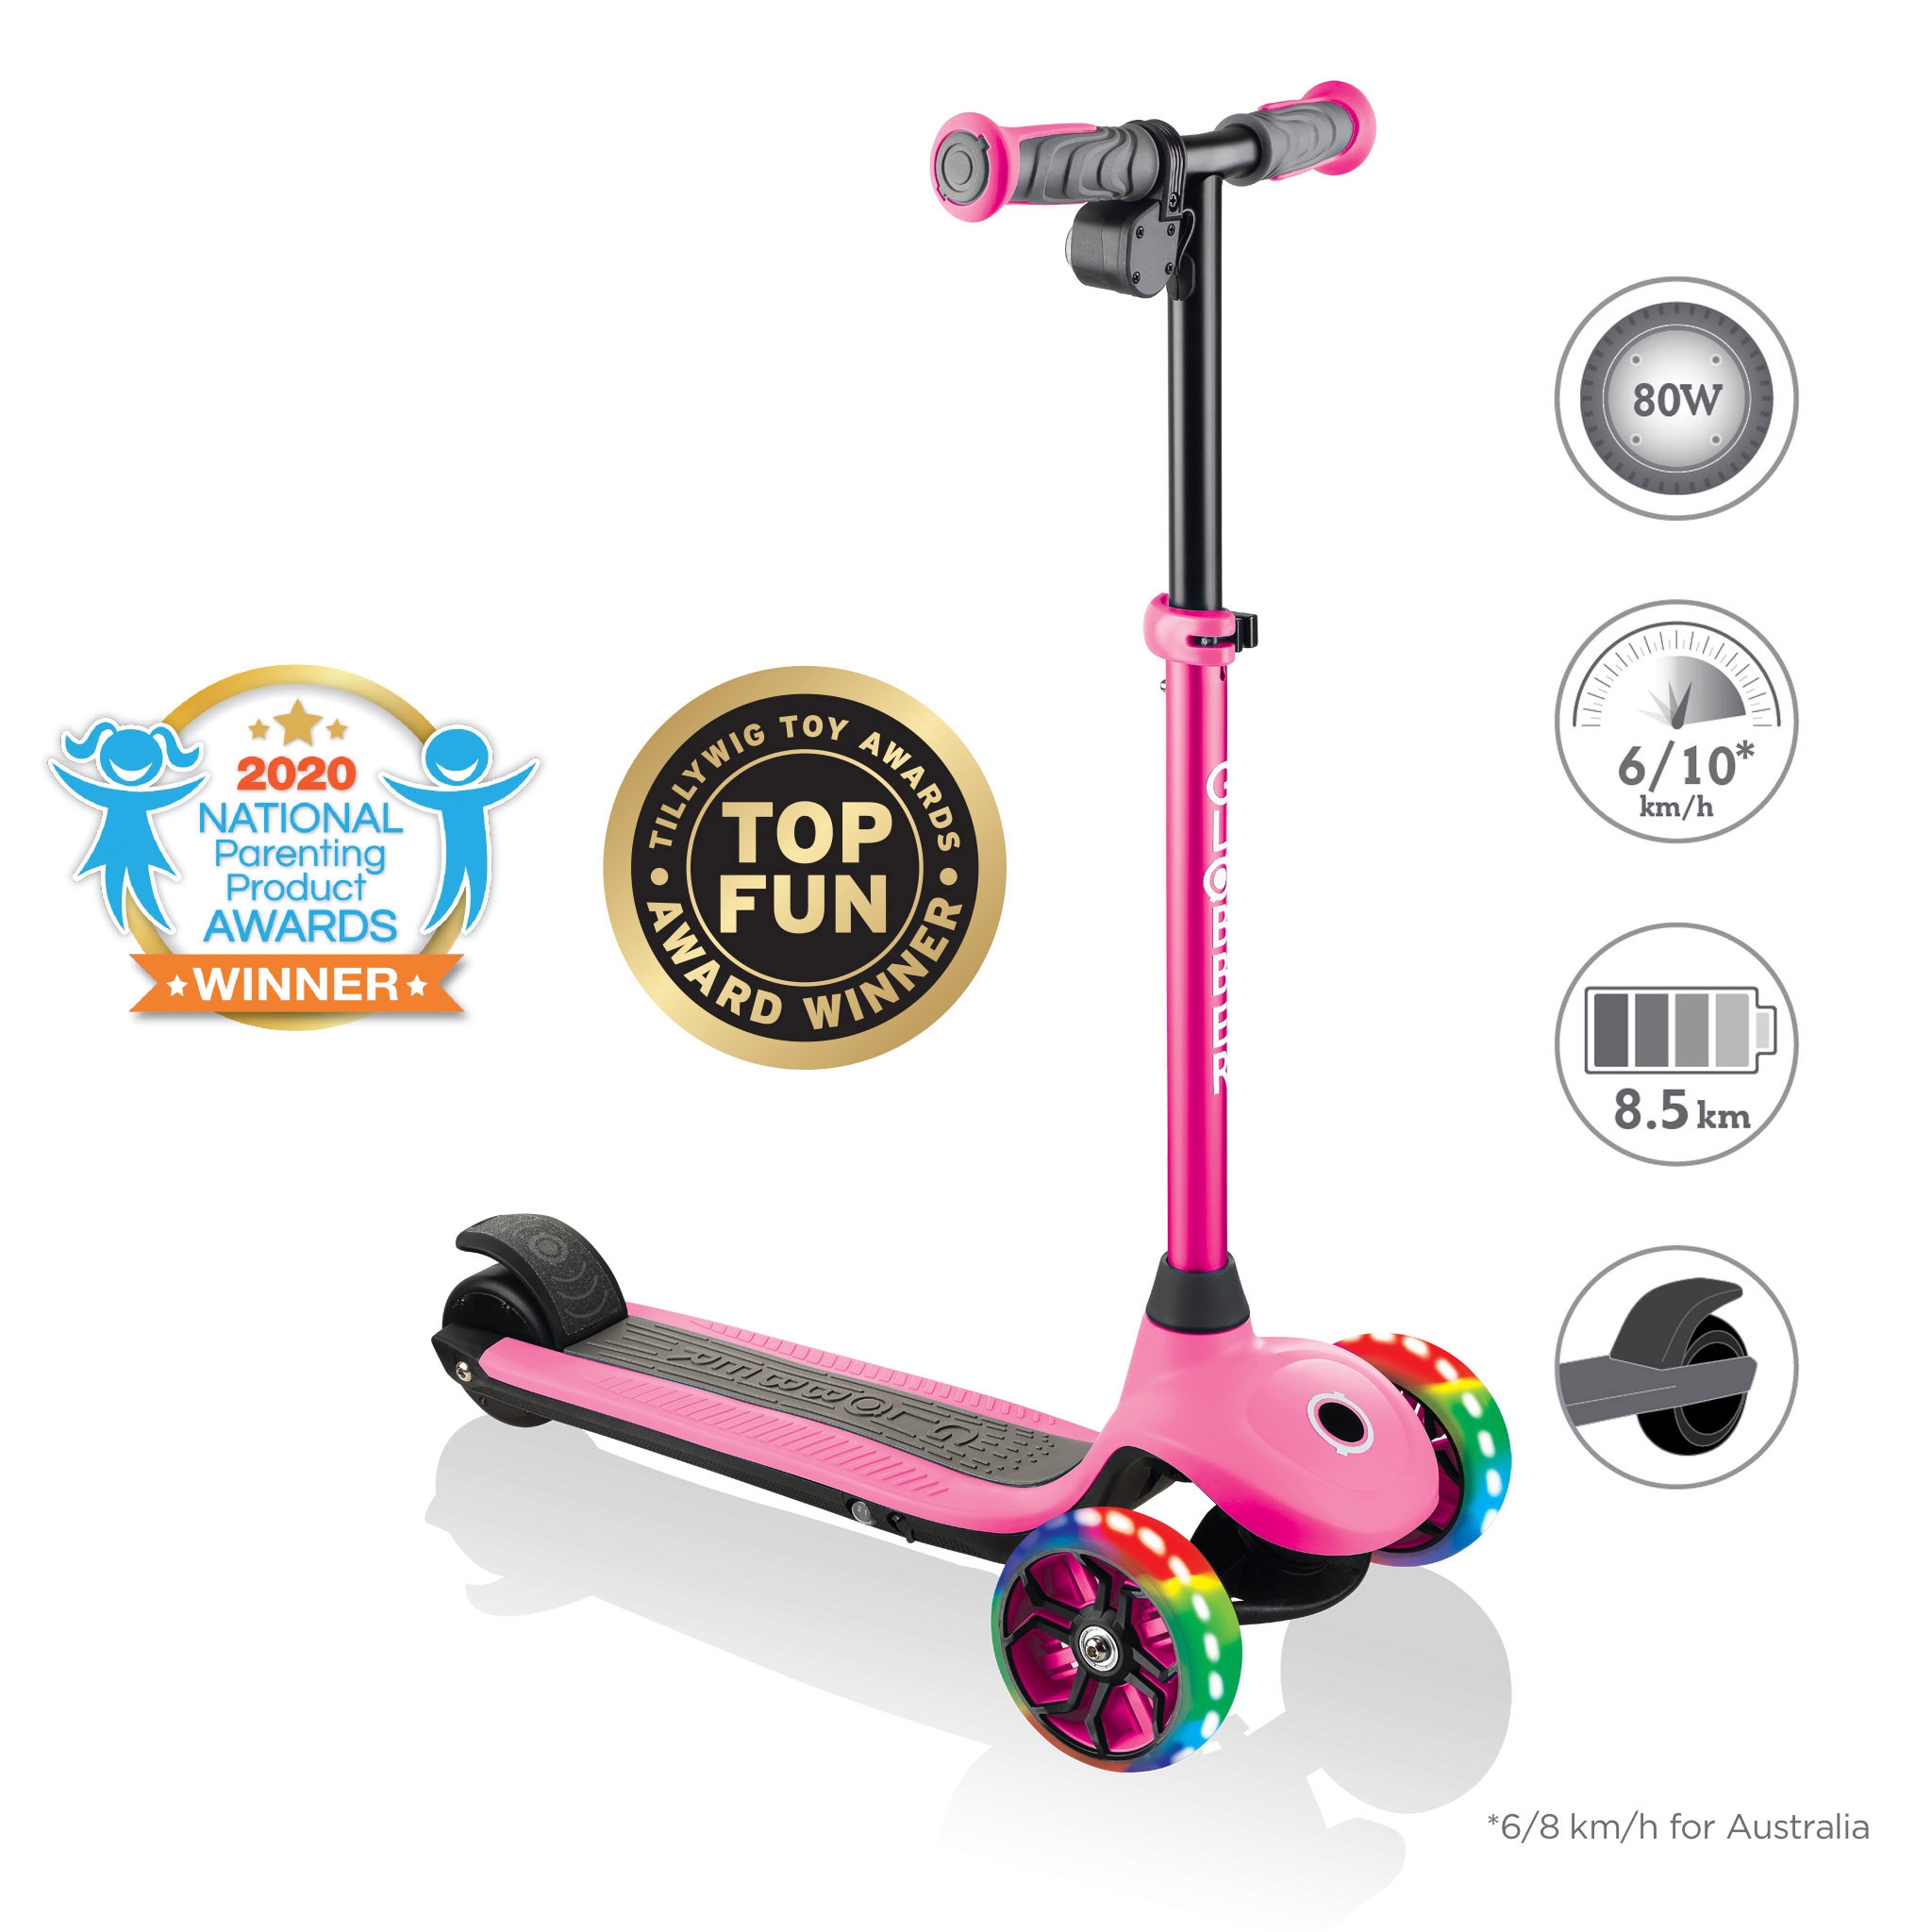 Globber-ONE-K-E-MOTION-4-award-winning-3-wheel-electric-scooter-for-boys-and-girls-with-80W-hub-motor 0